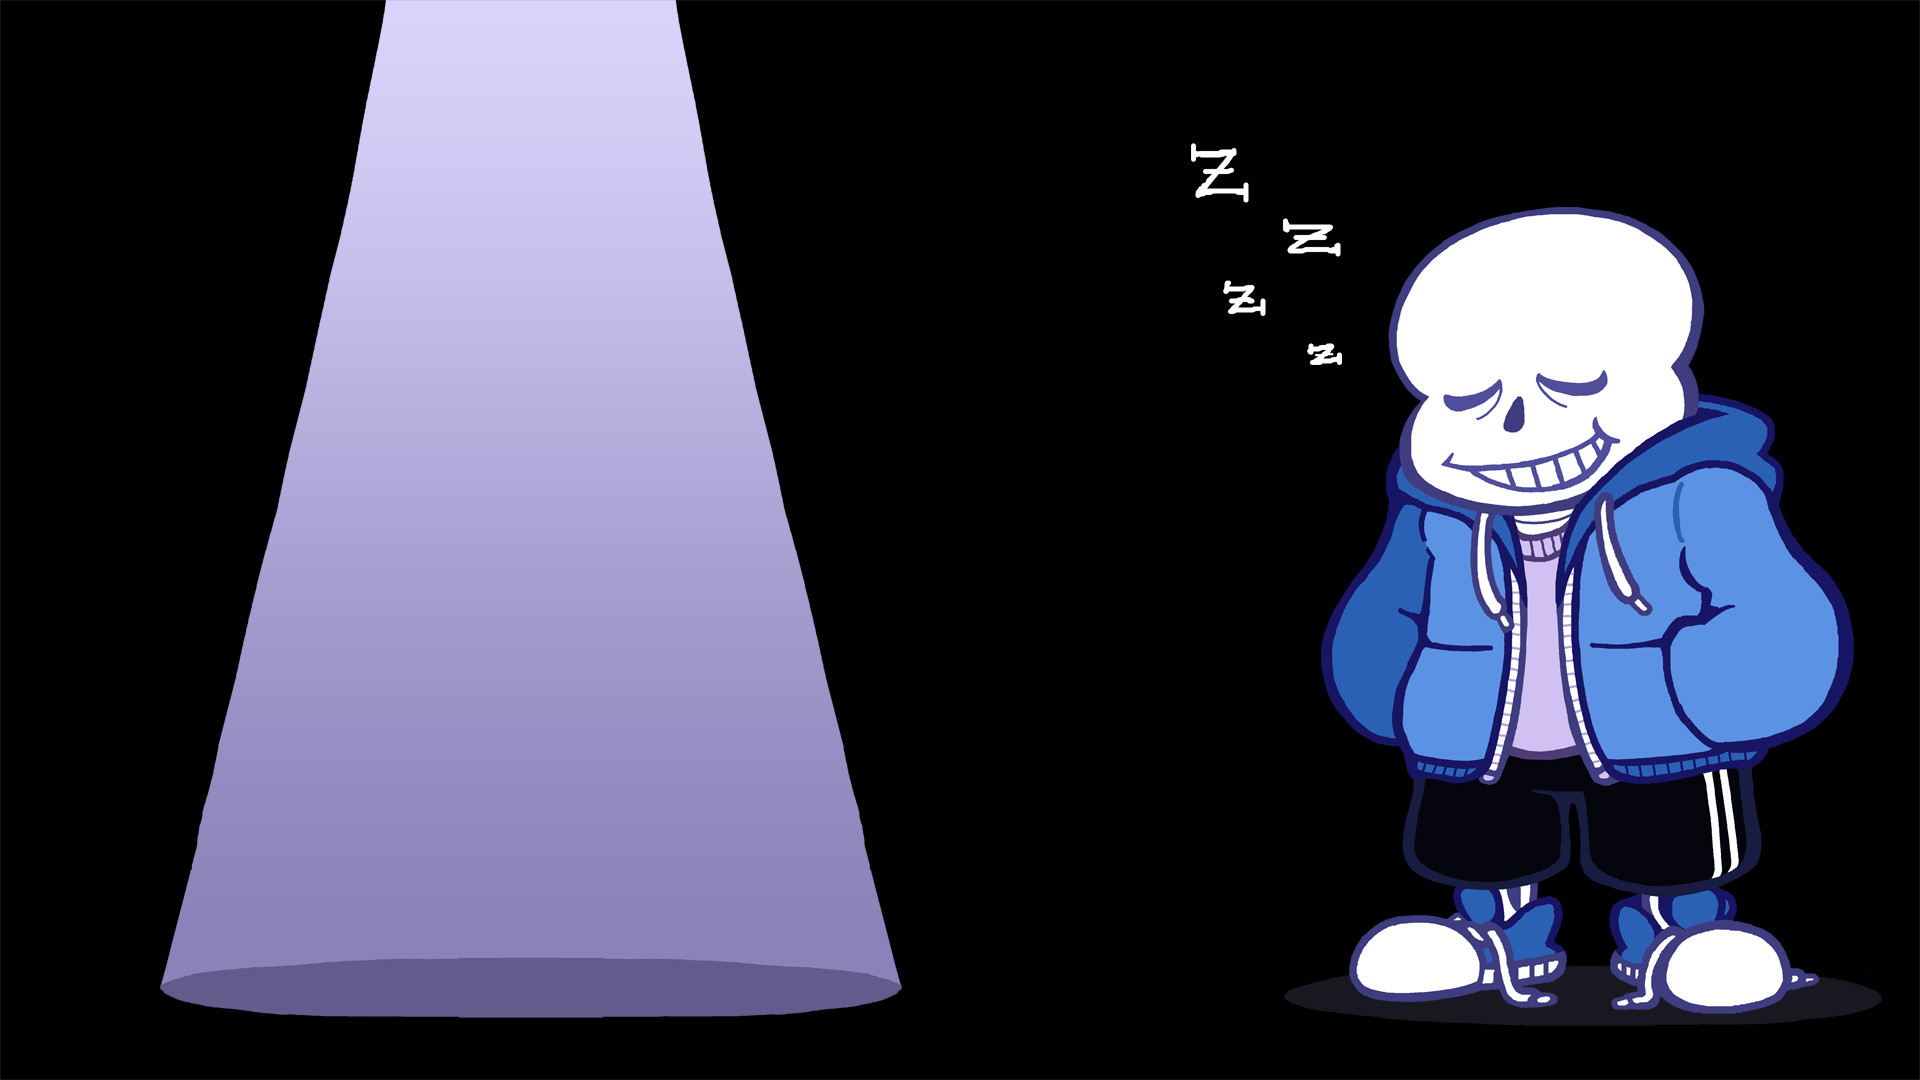 UNDERTALE-The Game images Sans Wallpaper HD wallpaper and background photos